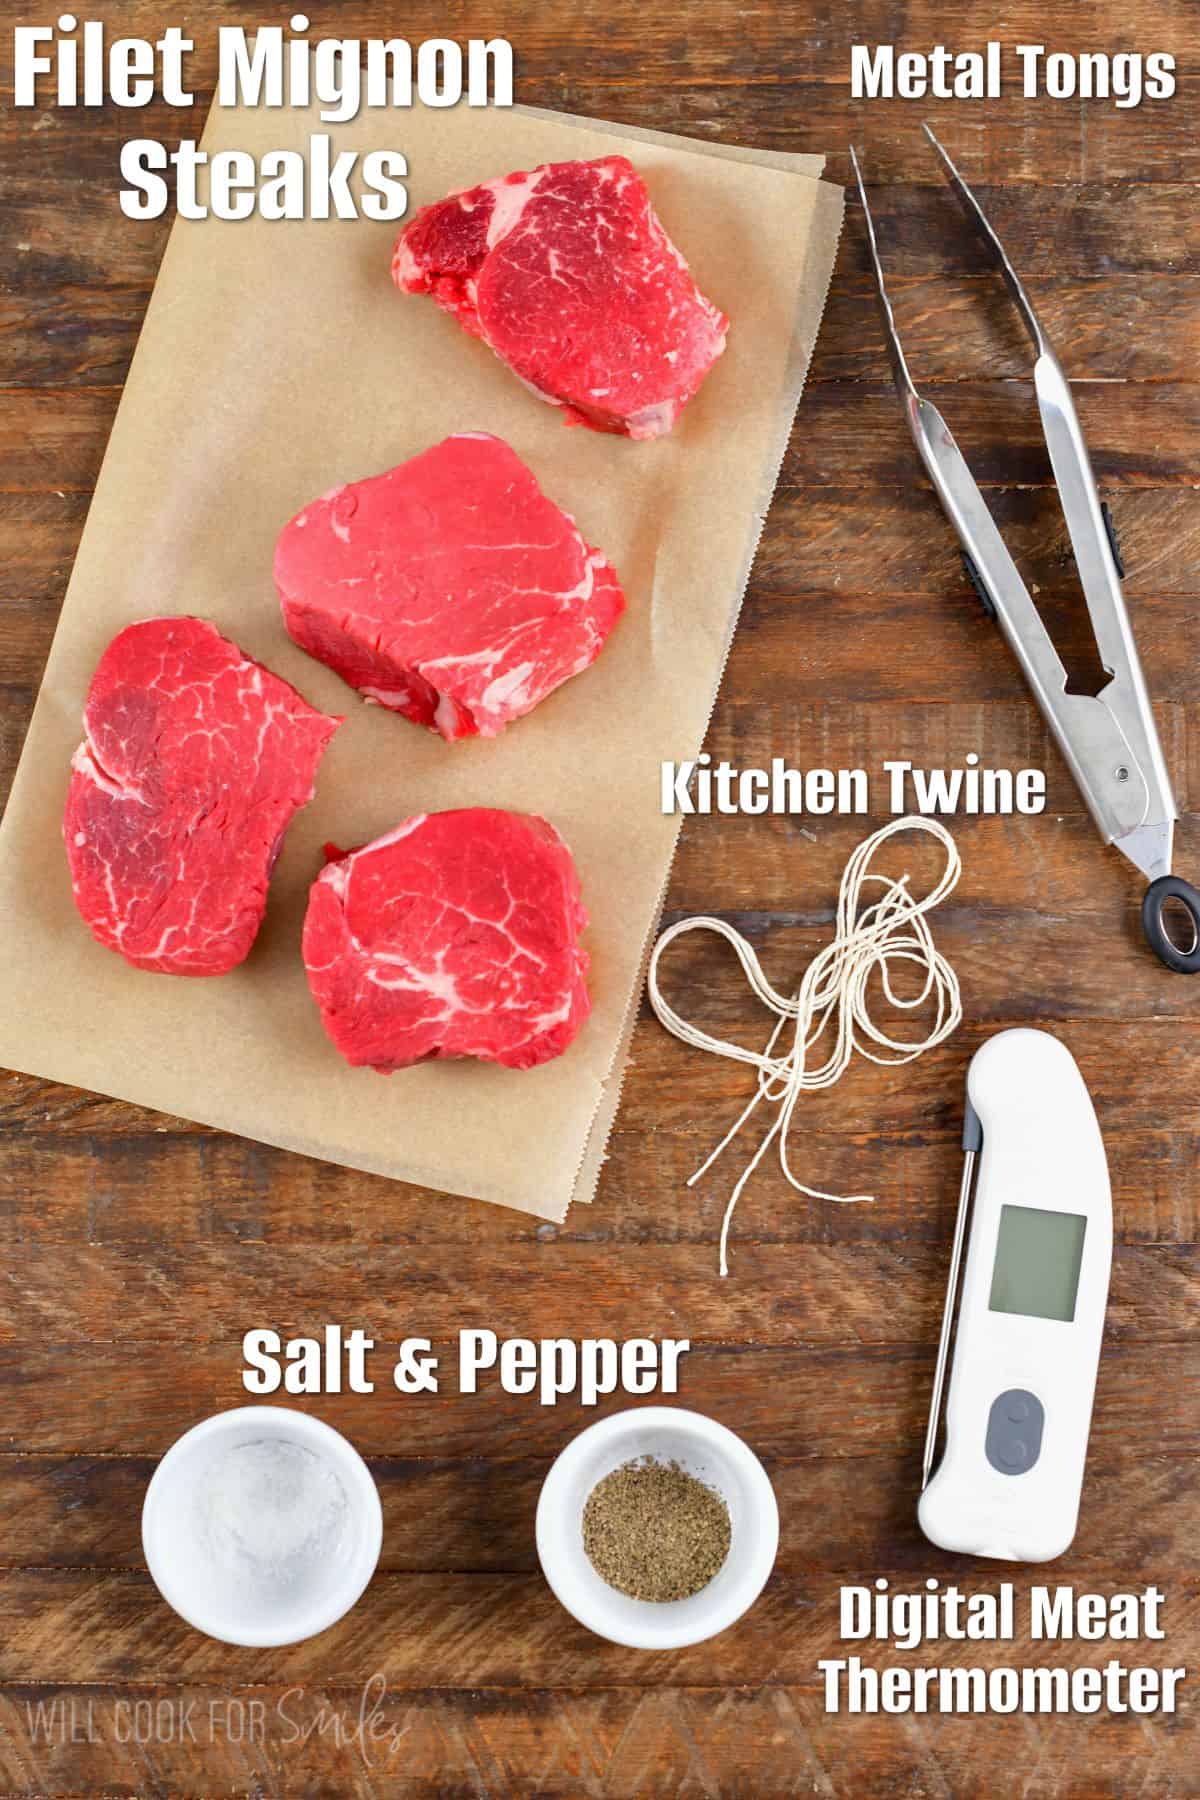 labeled ingredients and tools to cook filet mignon steaks at home.